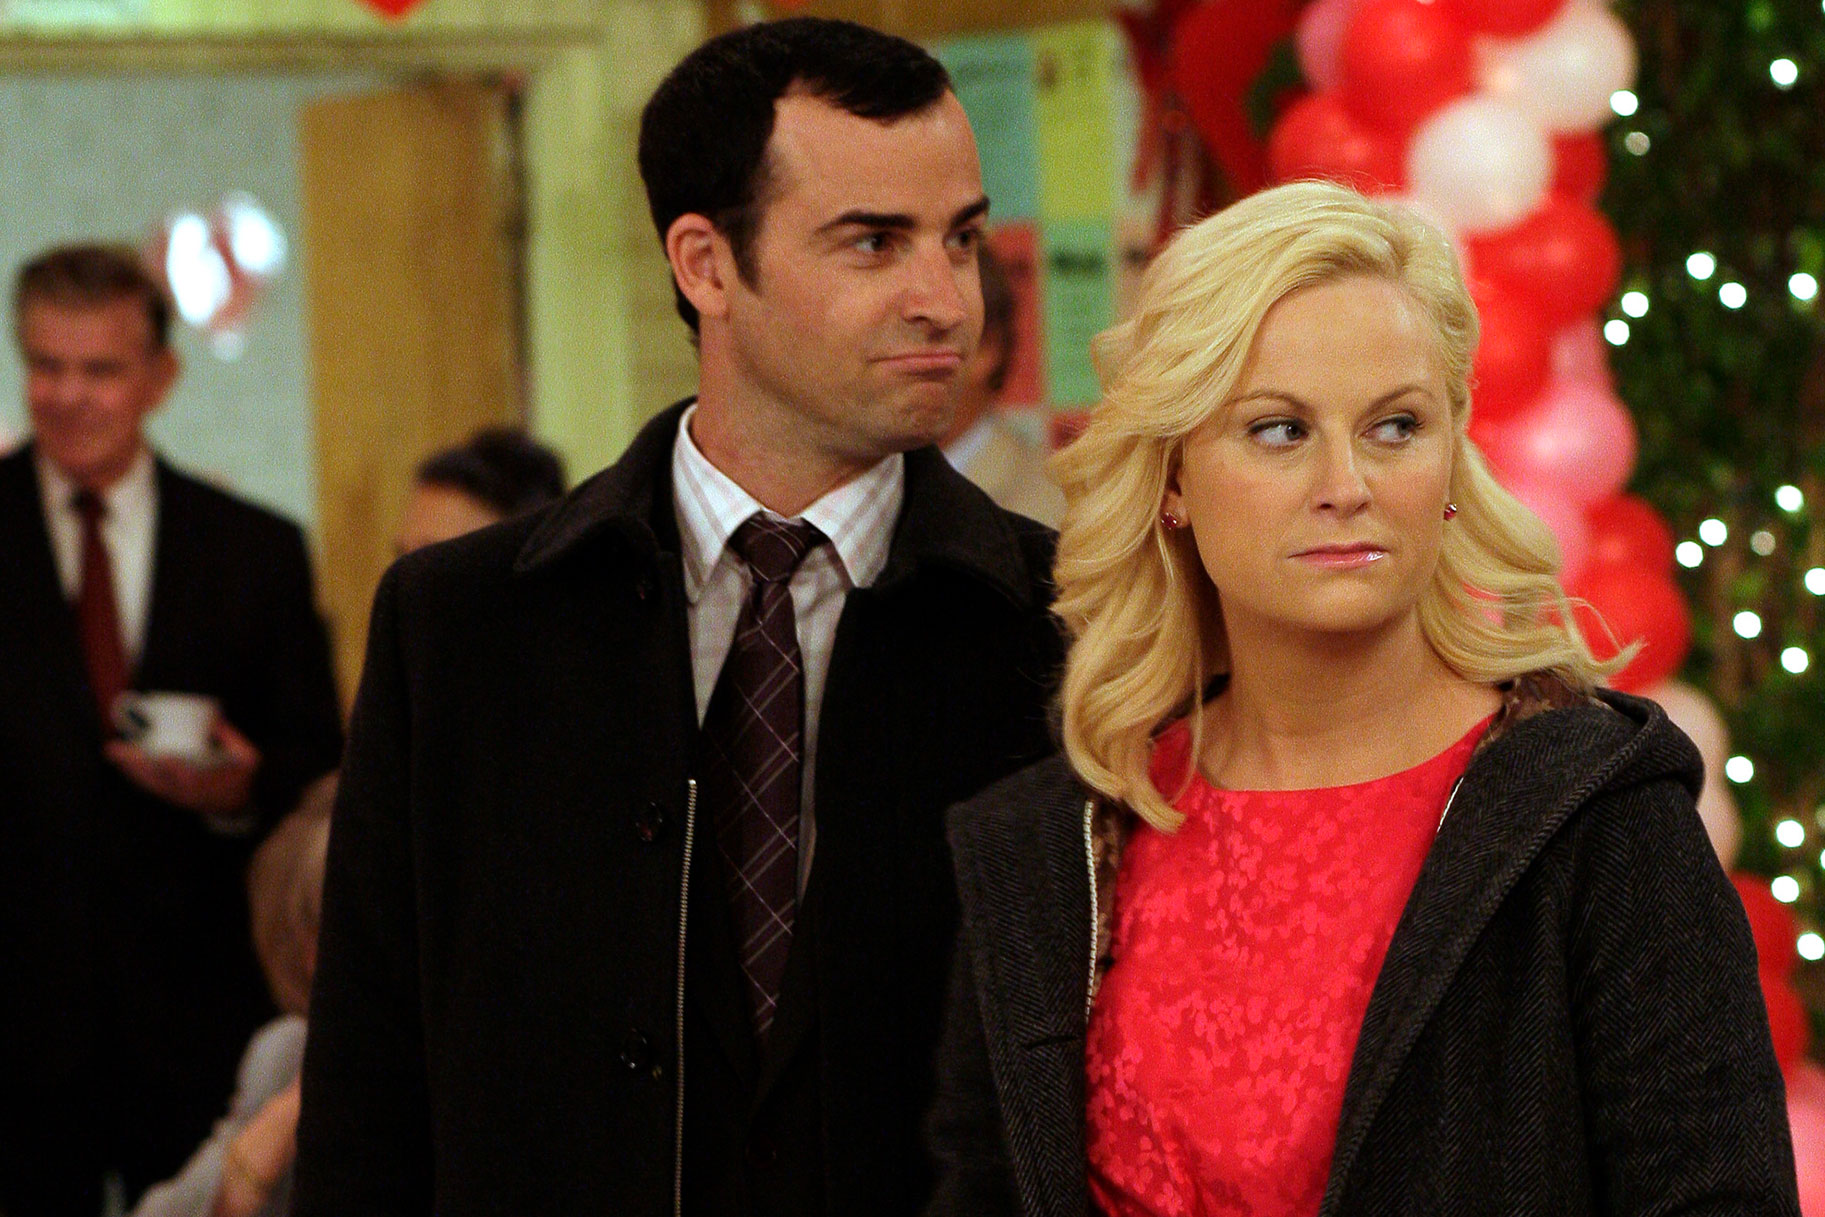 Justin Theroux as Justin Anderson, Amy Poehler as Leslie Knope